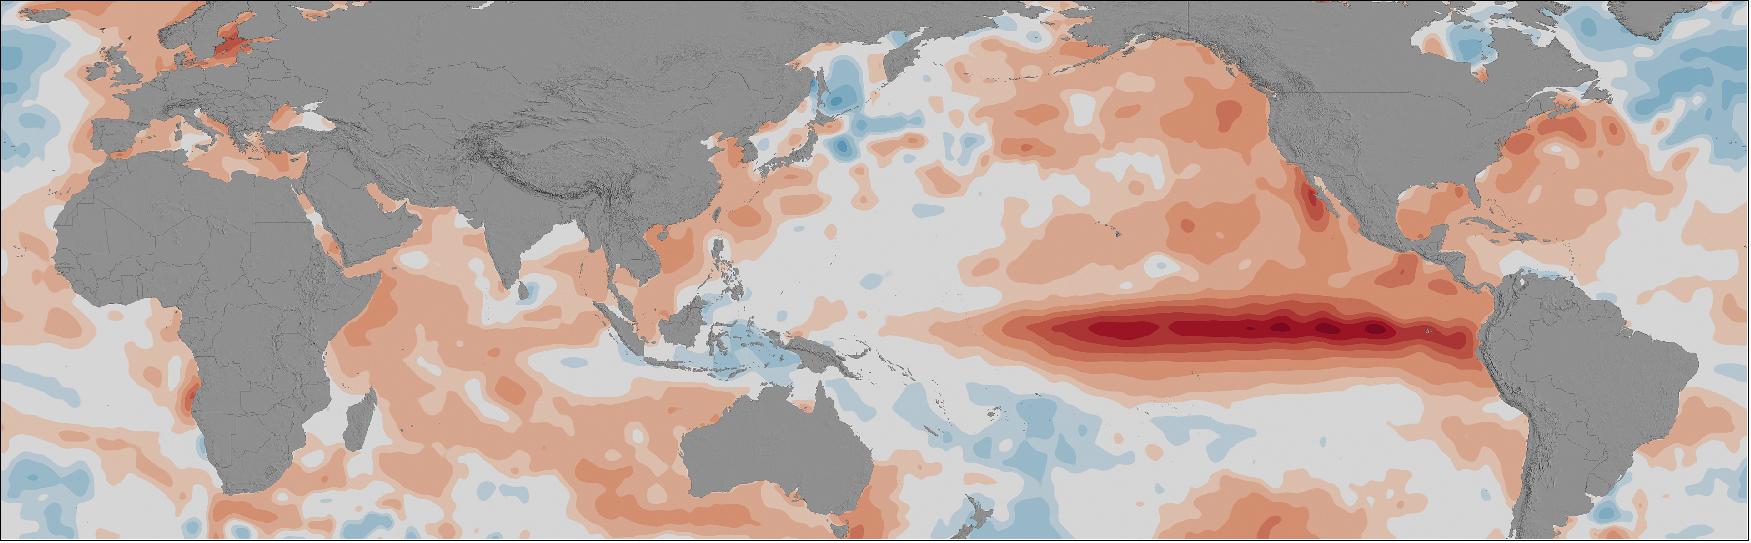 Figure 48: Increased sea surface temperatures in the equatorial Pacific Ocean characterizes an El Niño, which is followed by weather changes throughout the world (image credit: NASA Goddard’s Scientific Visualization Studio)